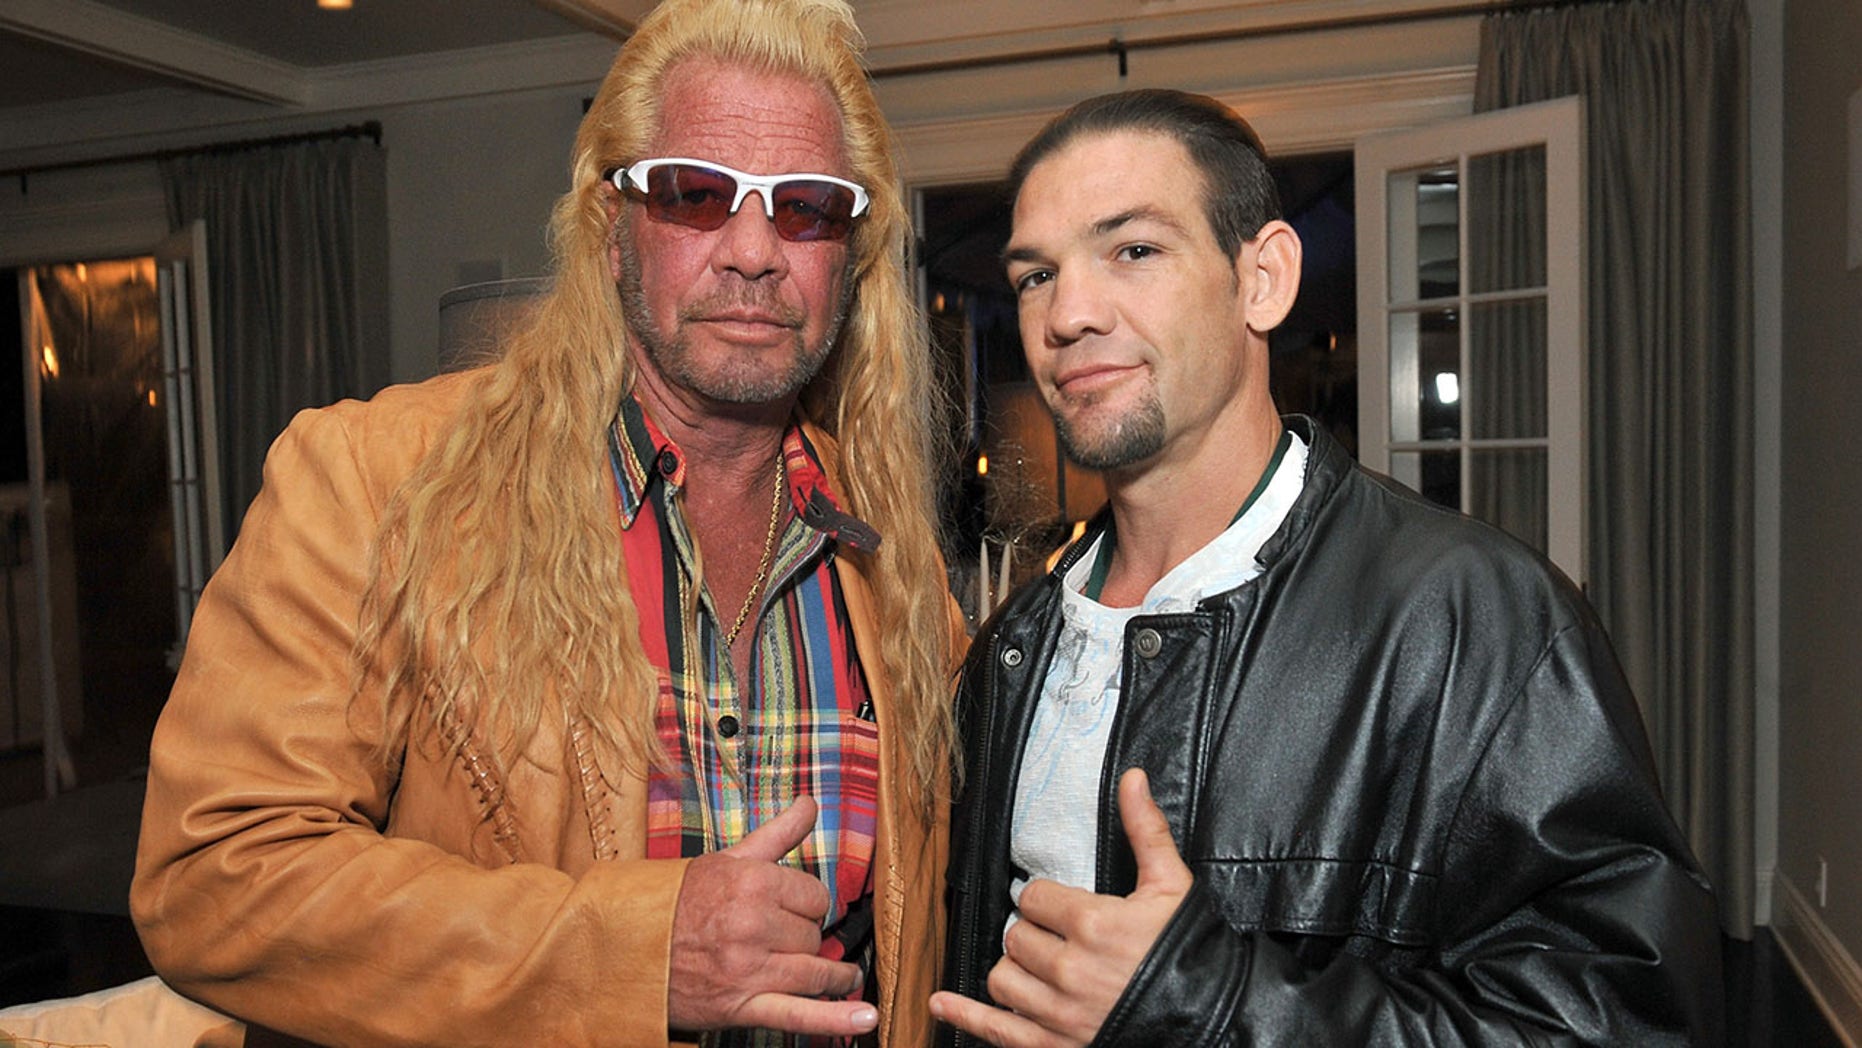 Los Angeles, CA - Dec. 12: Dog Chapman and Leland Chapman attend the 2013 Electus & amp; College Humor Holiday Party at a private residence on December 12, 2013 in Los Angeles, California. (Photo by Angela Weiss / Getty Images for Electus)